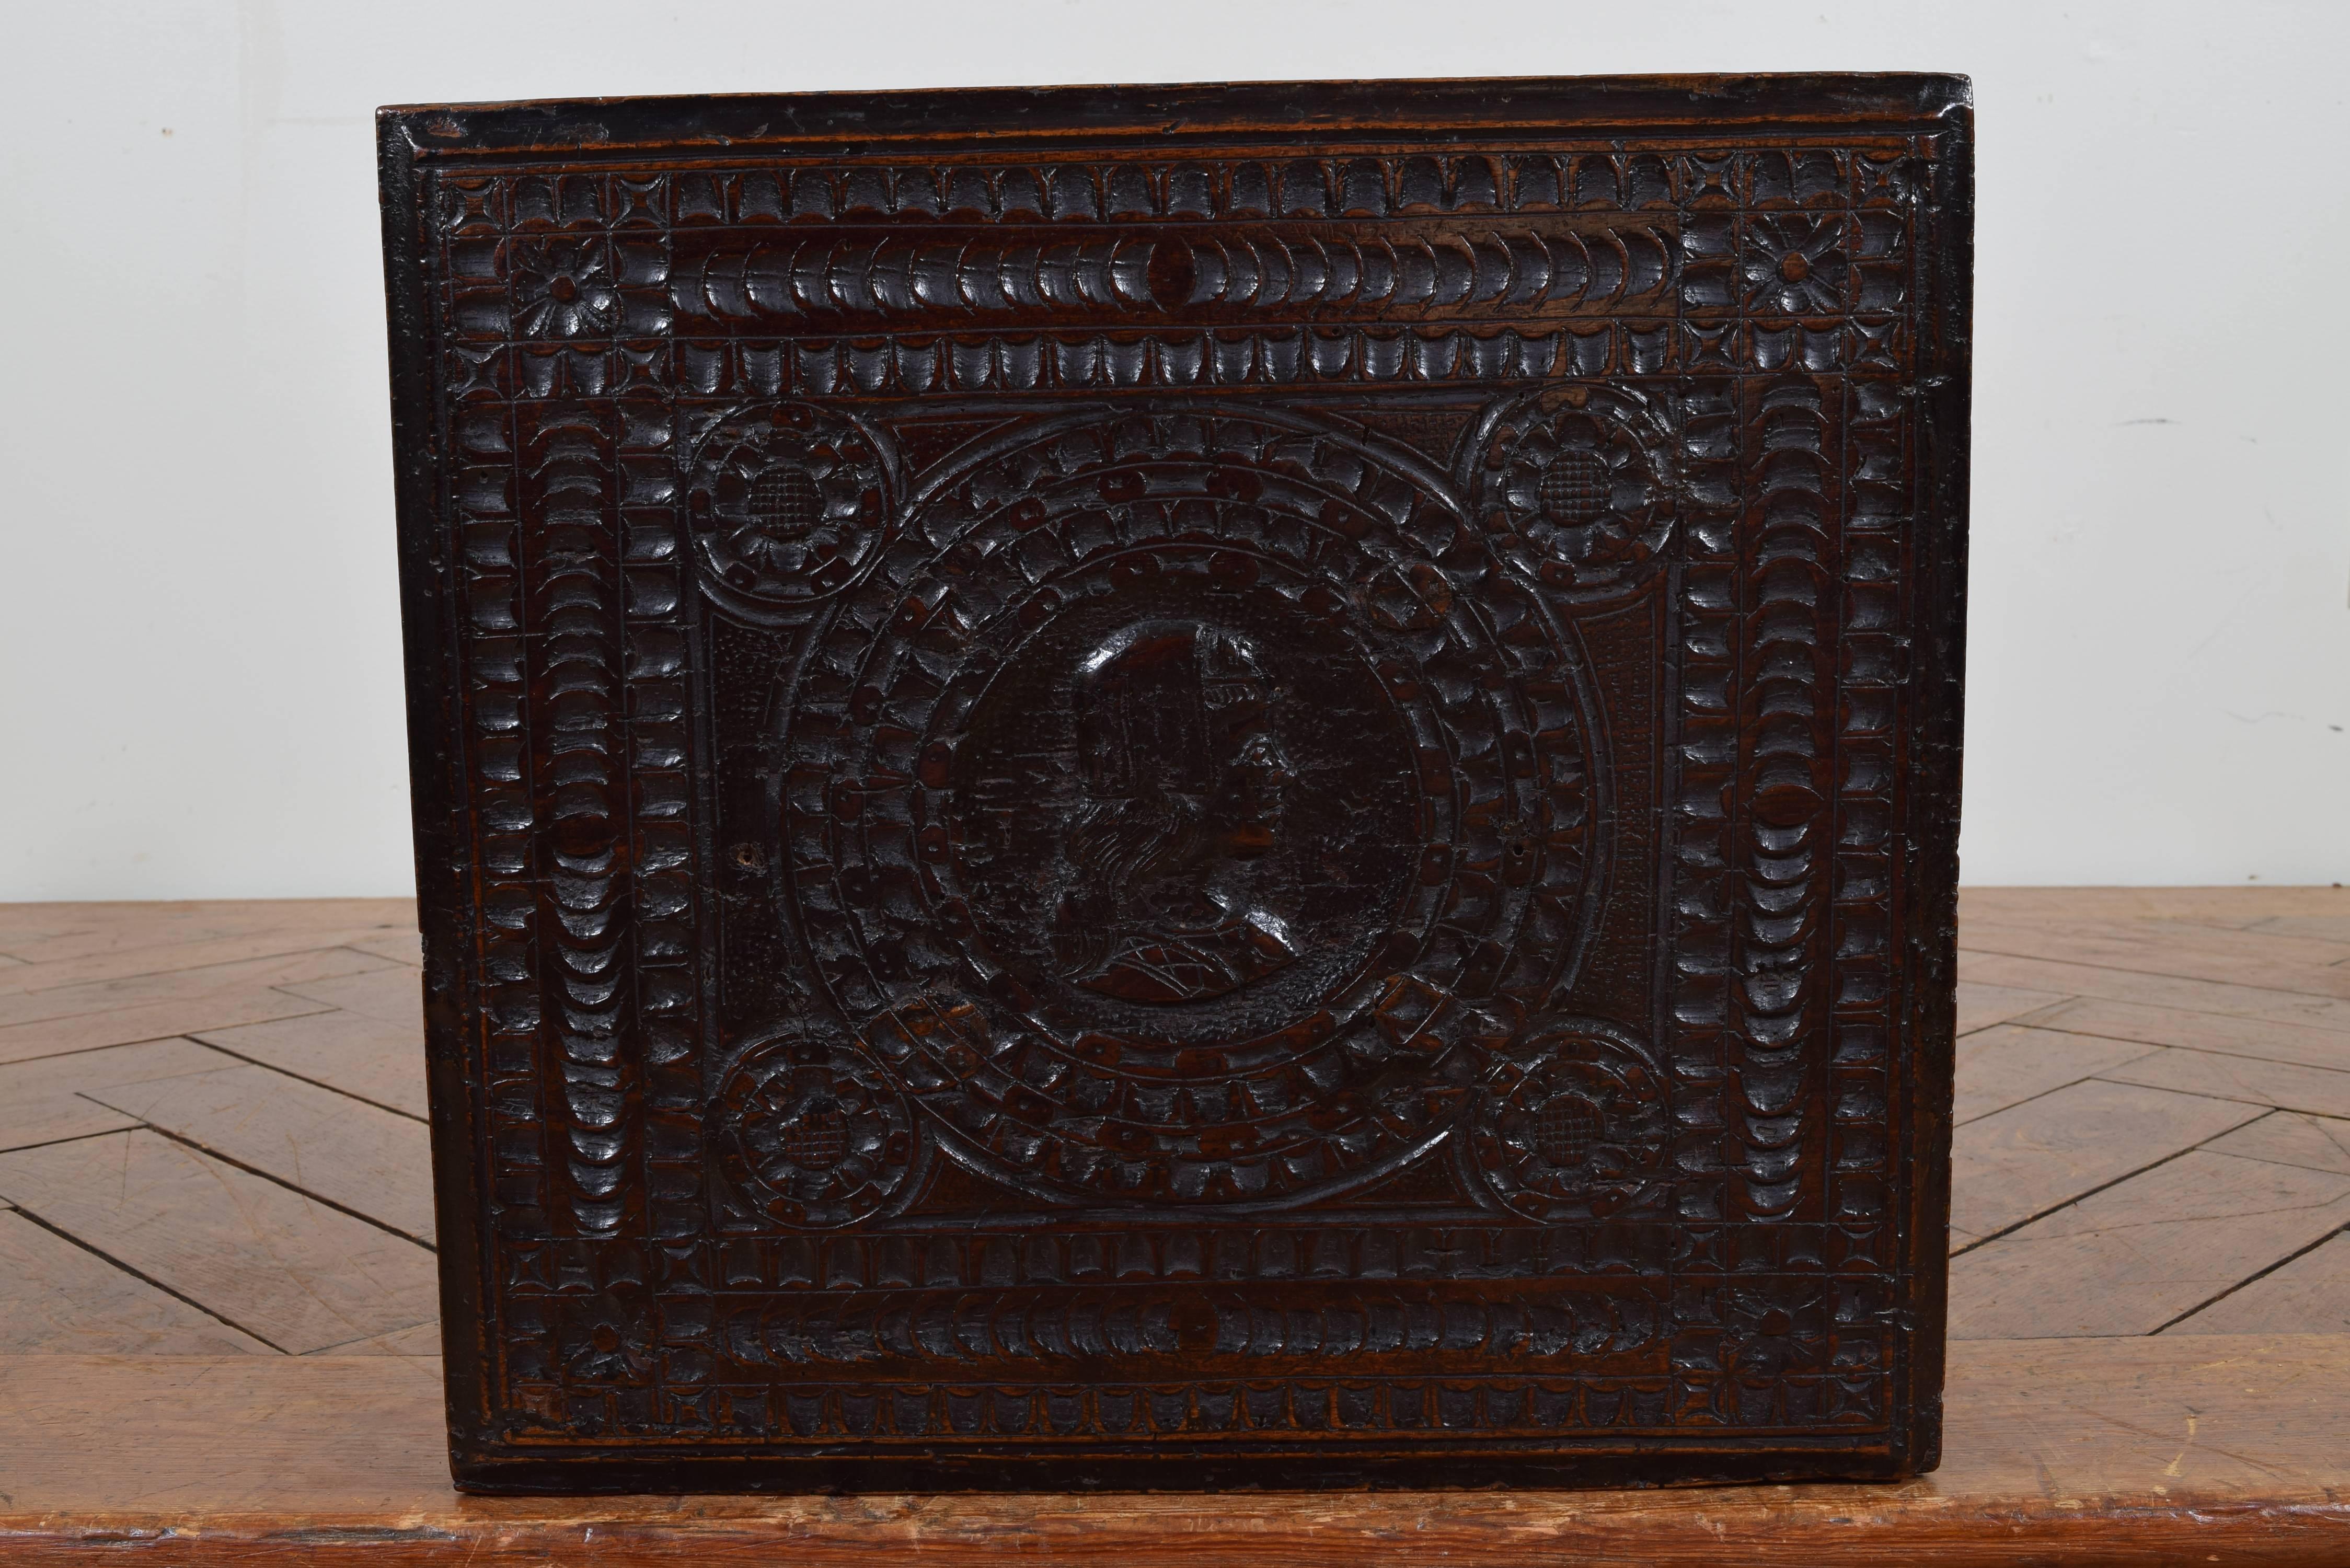 Renaissance Revival Italian Renaissance Style Carved and Ebonized Side Table, Late 19th Century